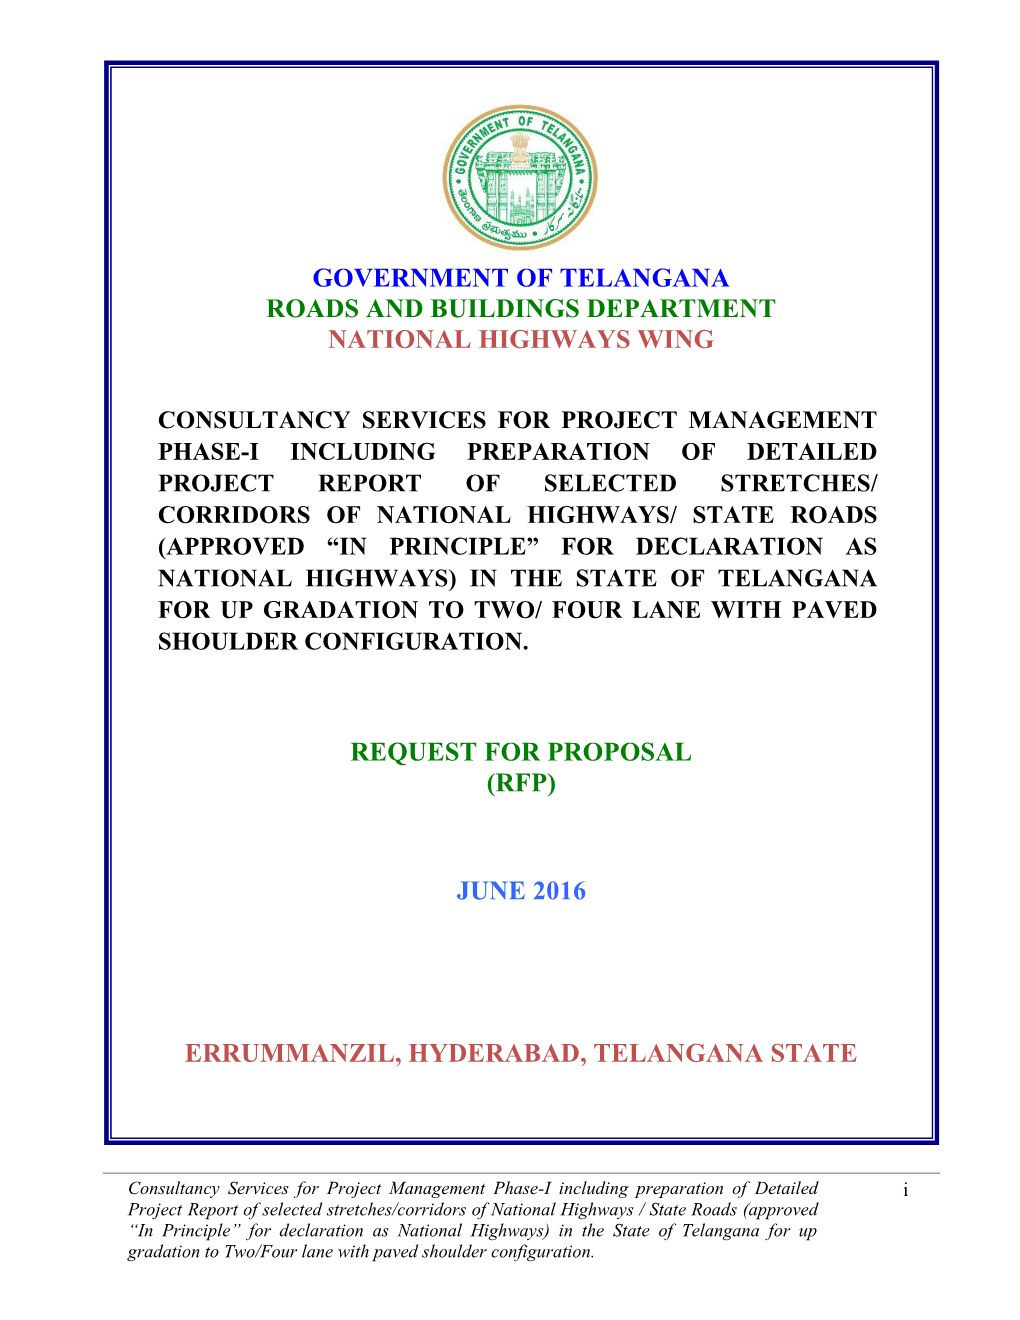 Government of Telangana Roads and Buildings Department National Highways Wing Request for Proposal